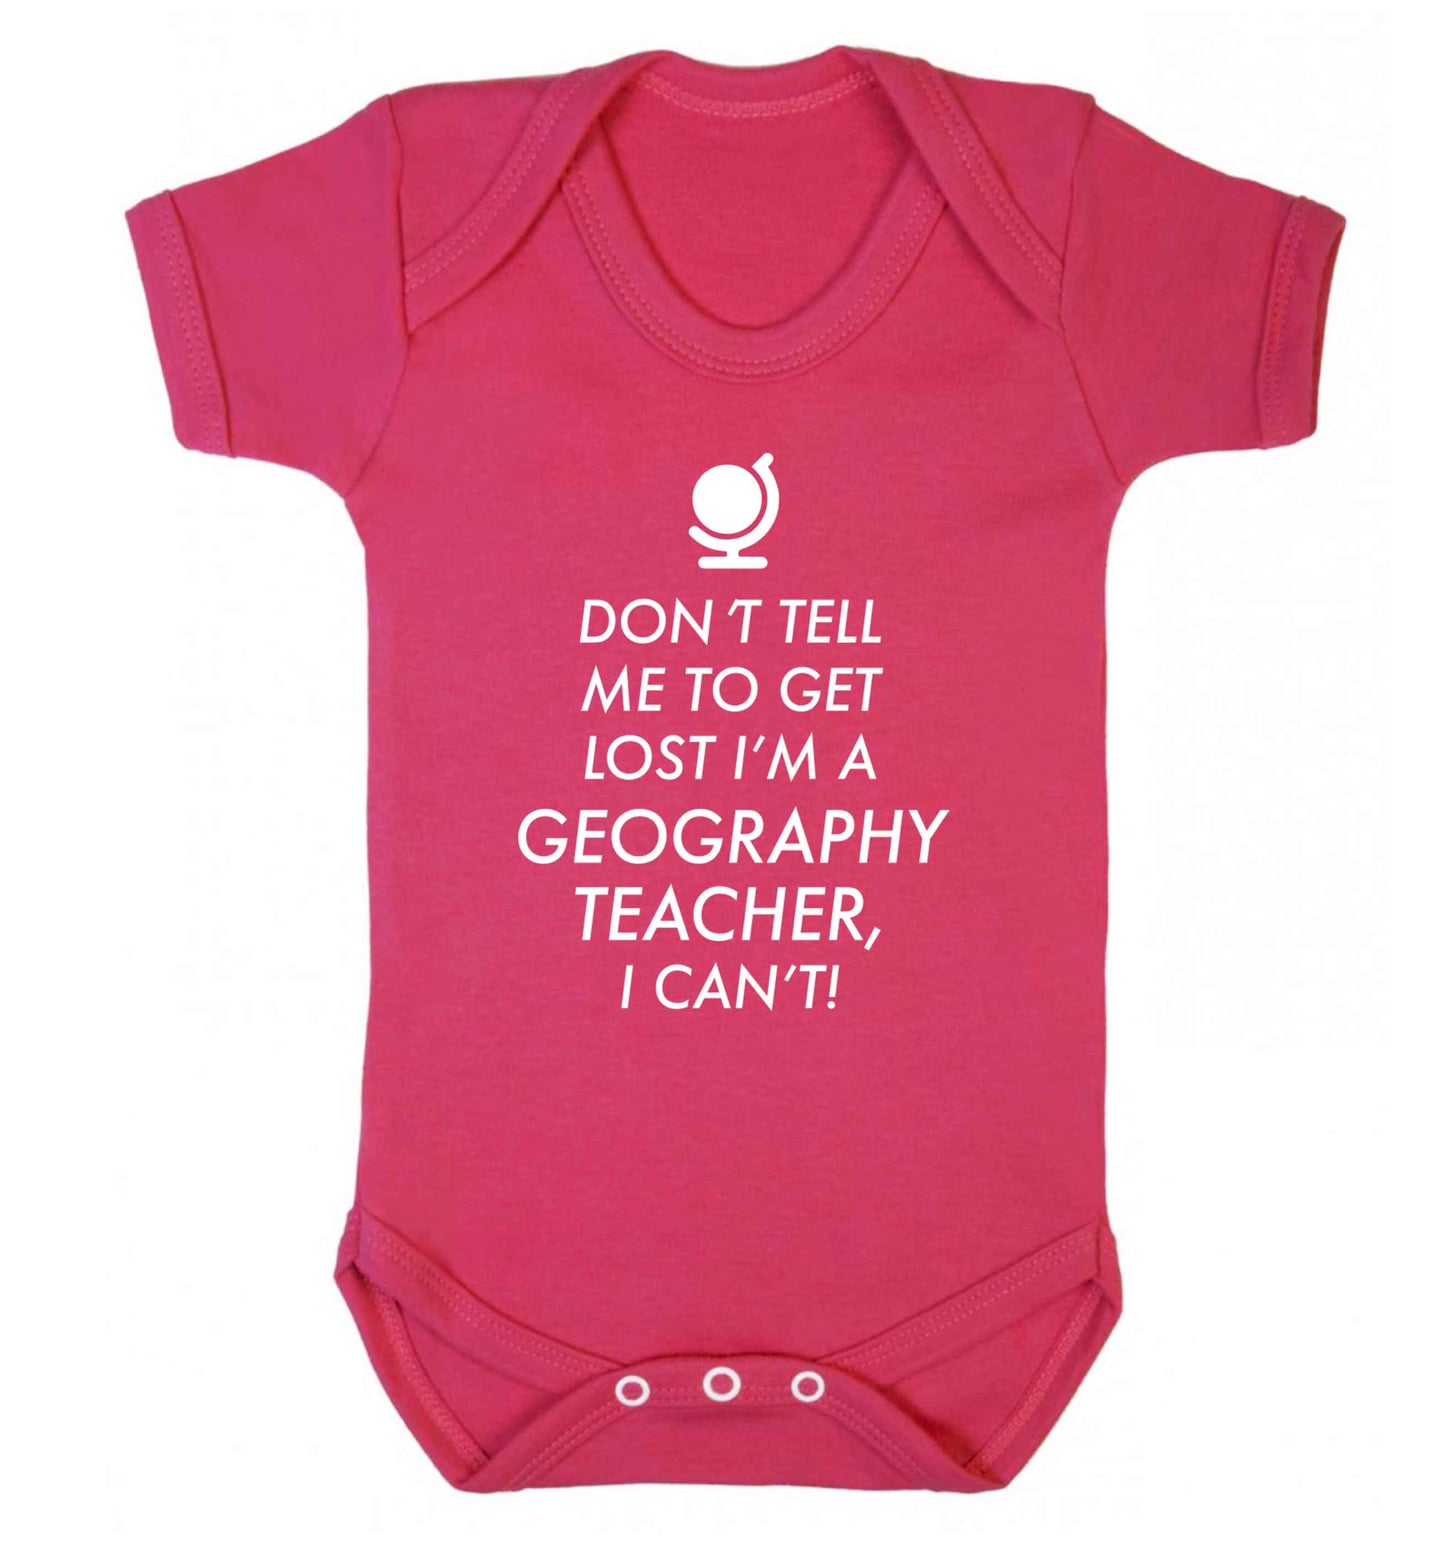 Don't tell me to get lost I'm a geography teacher, I can't Baby Vest dark pink 18-24 months